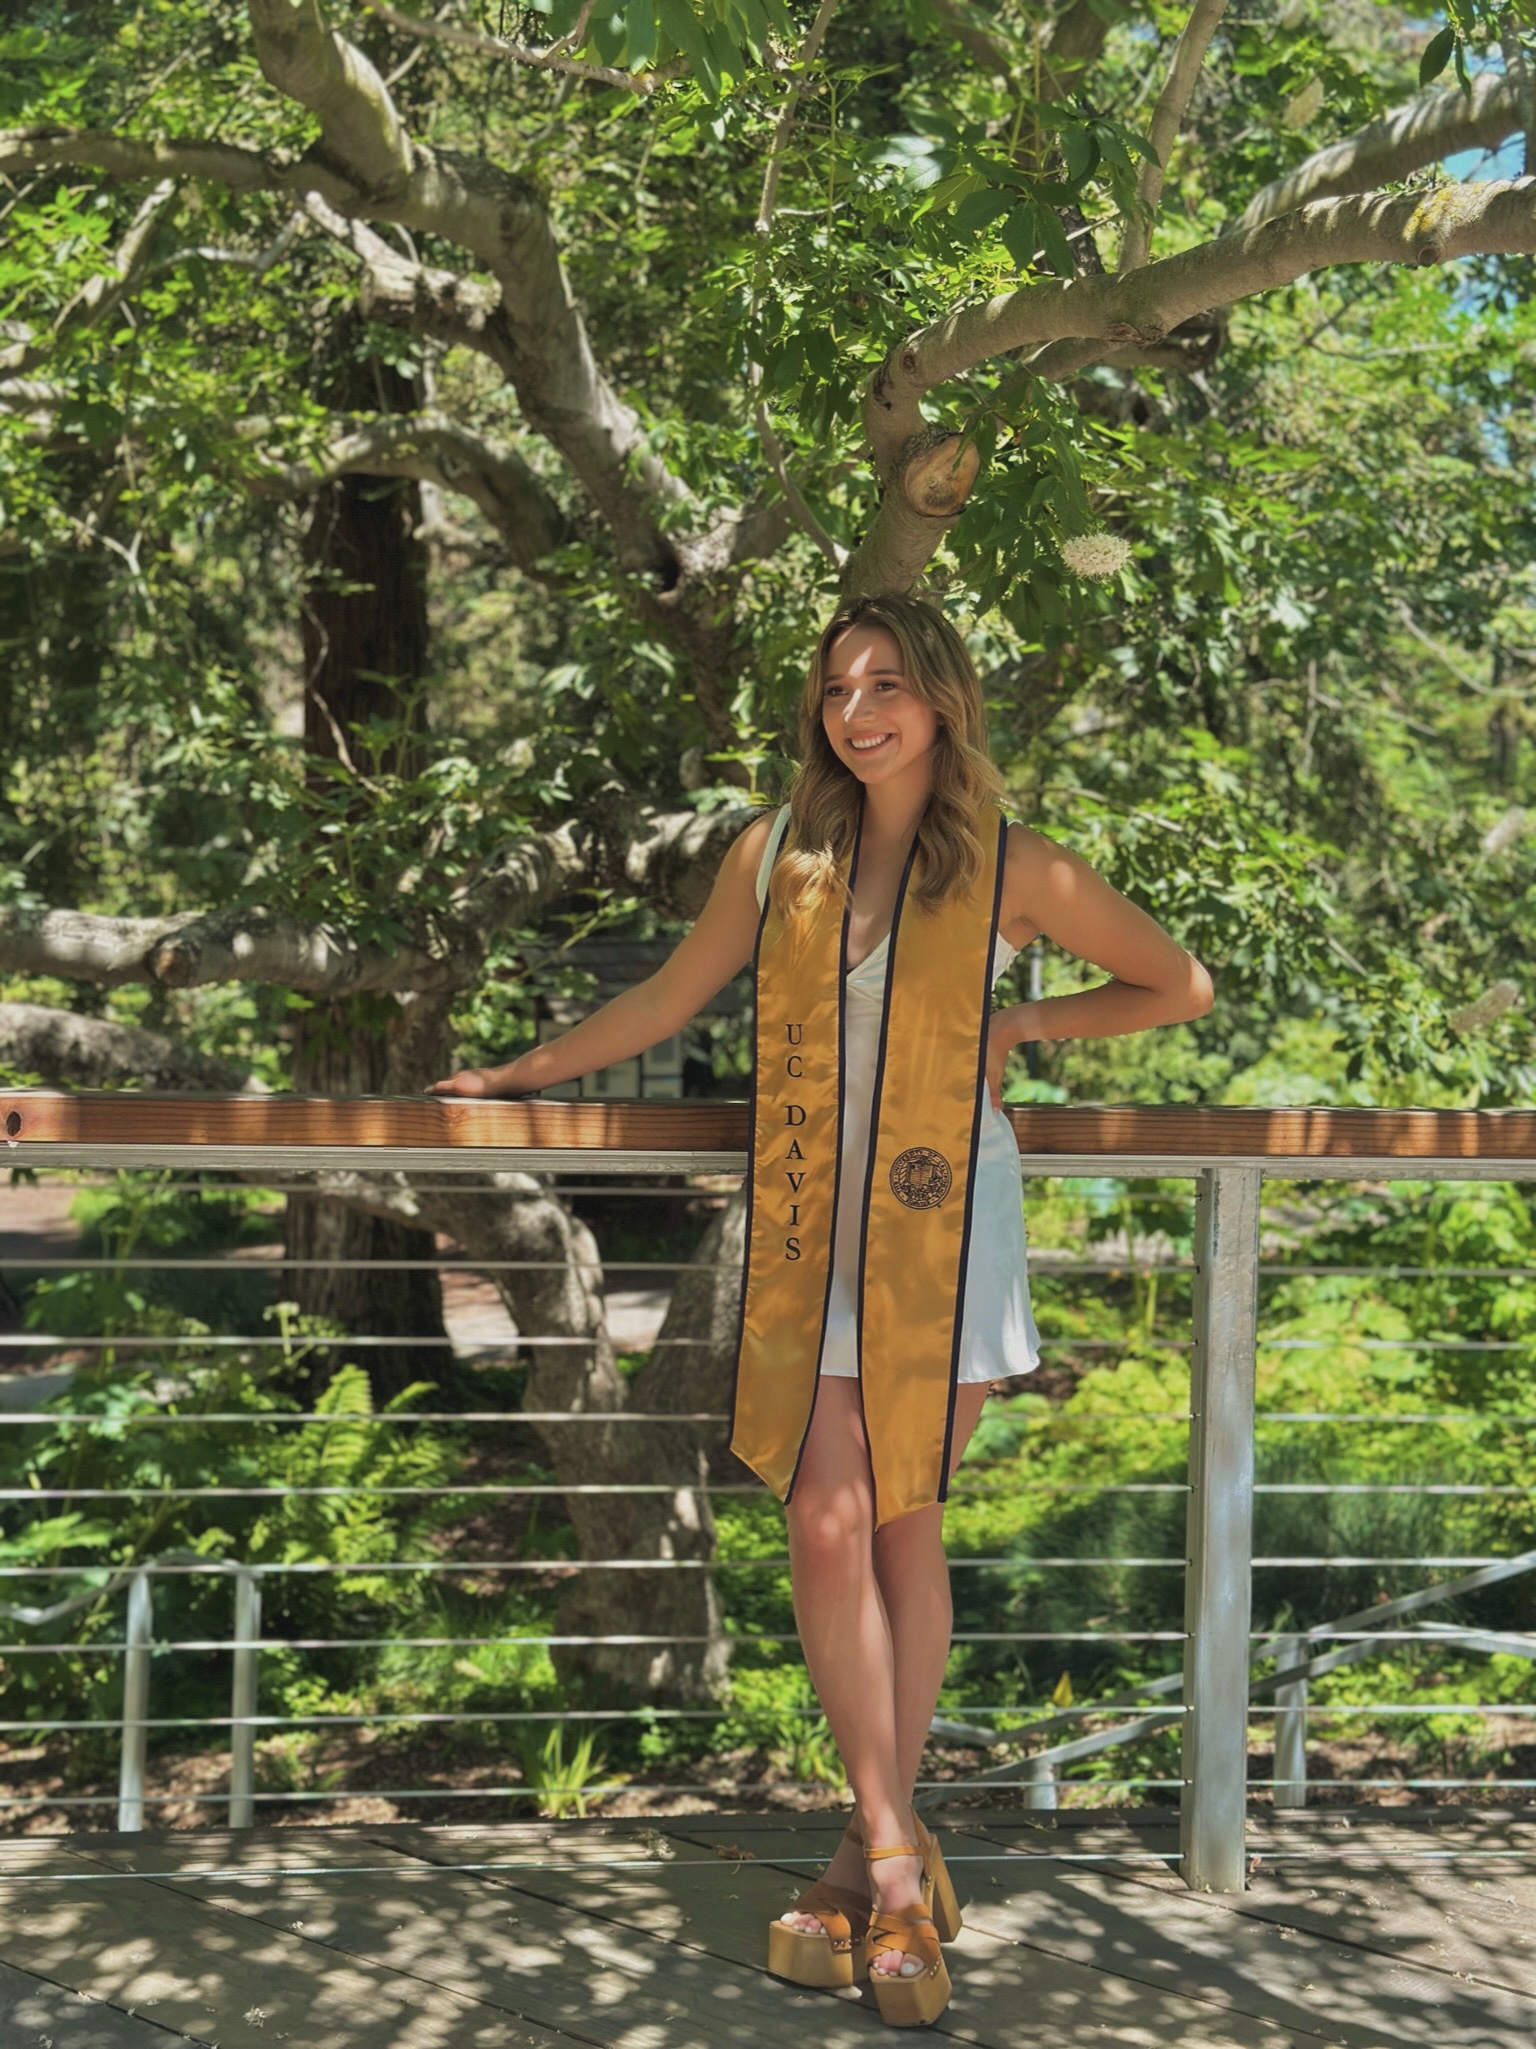 A photo of Sam Martinez, wearing a white dress and gold and blue UC Davis graduation shawl, standing in the shade under a leafy tree.